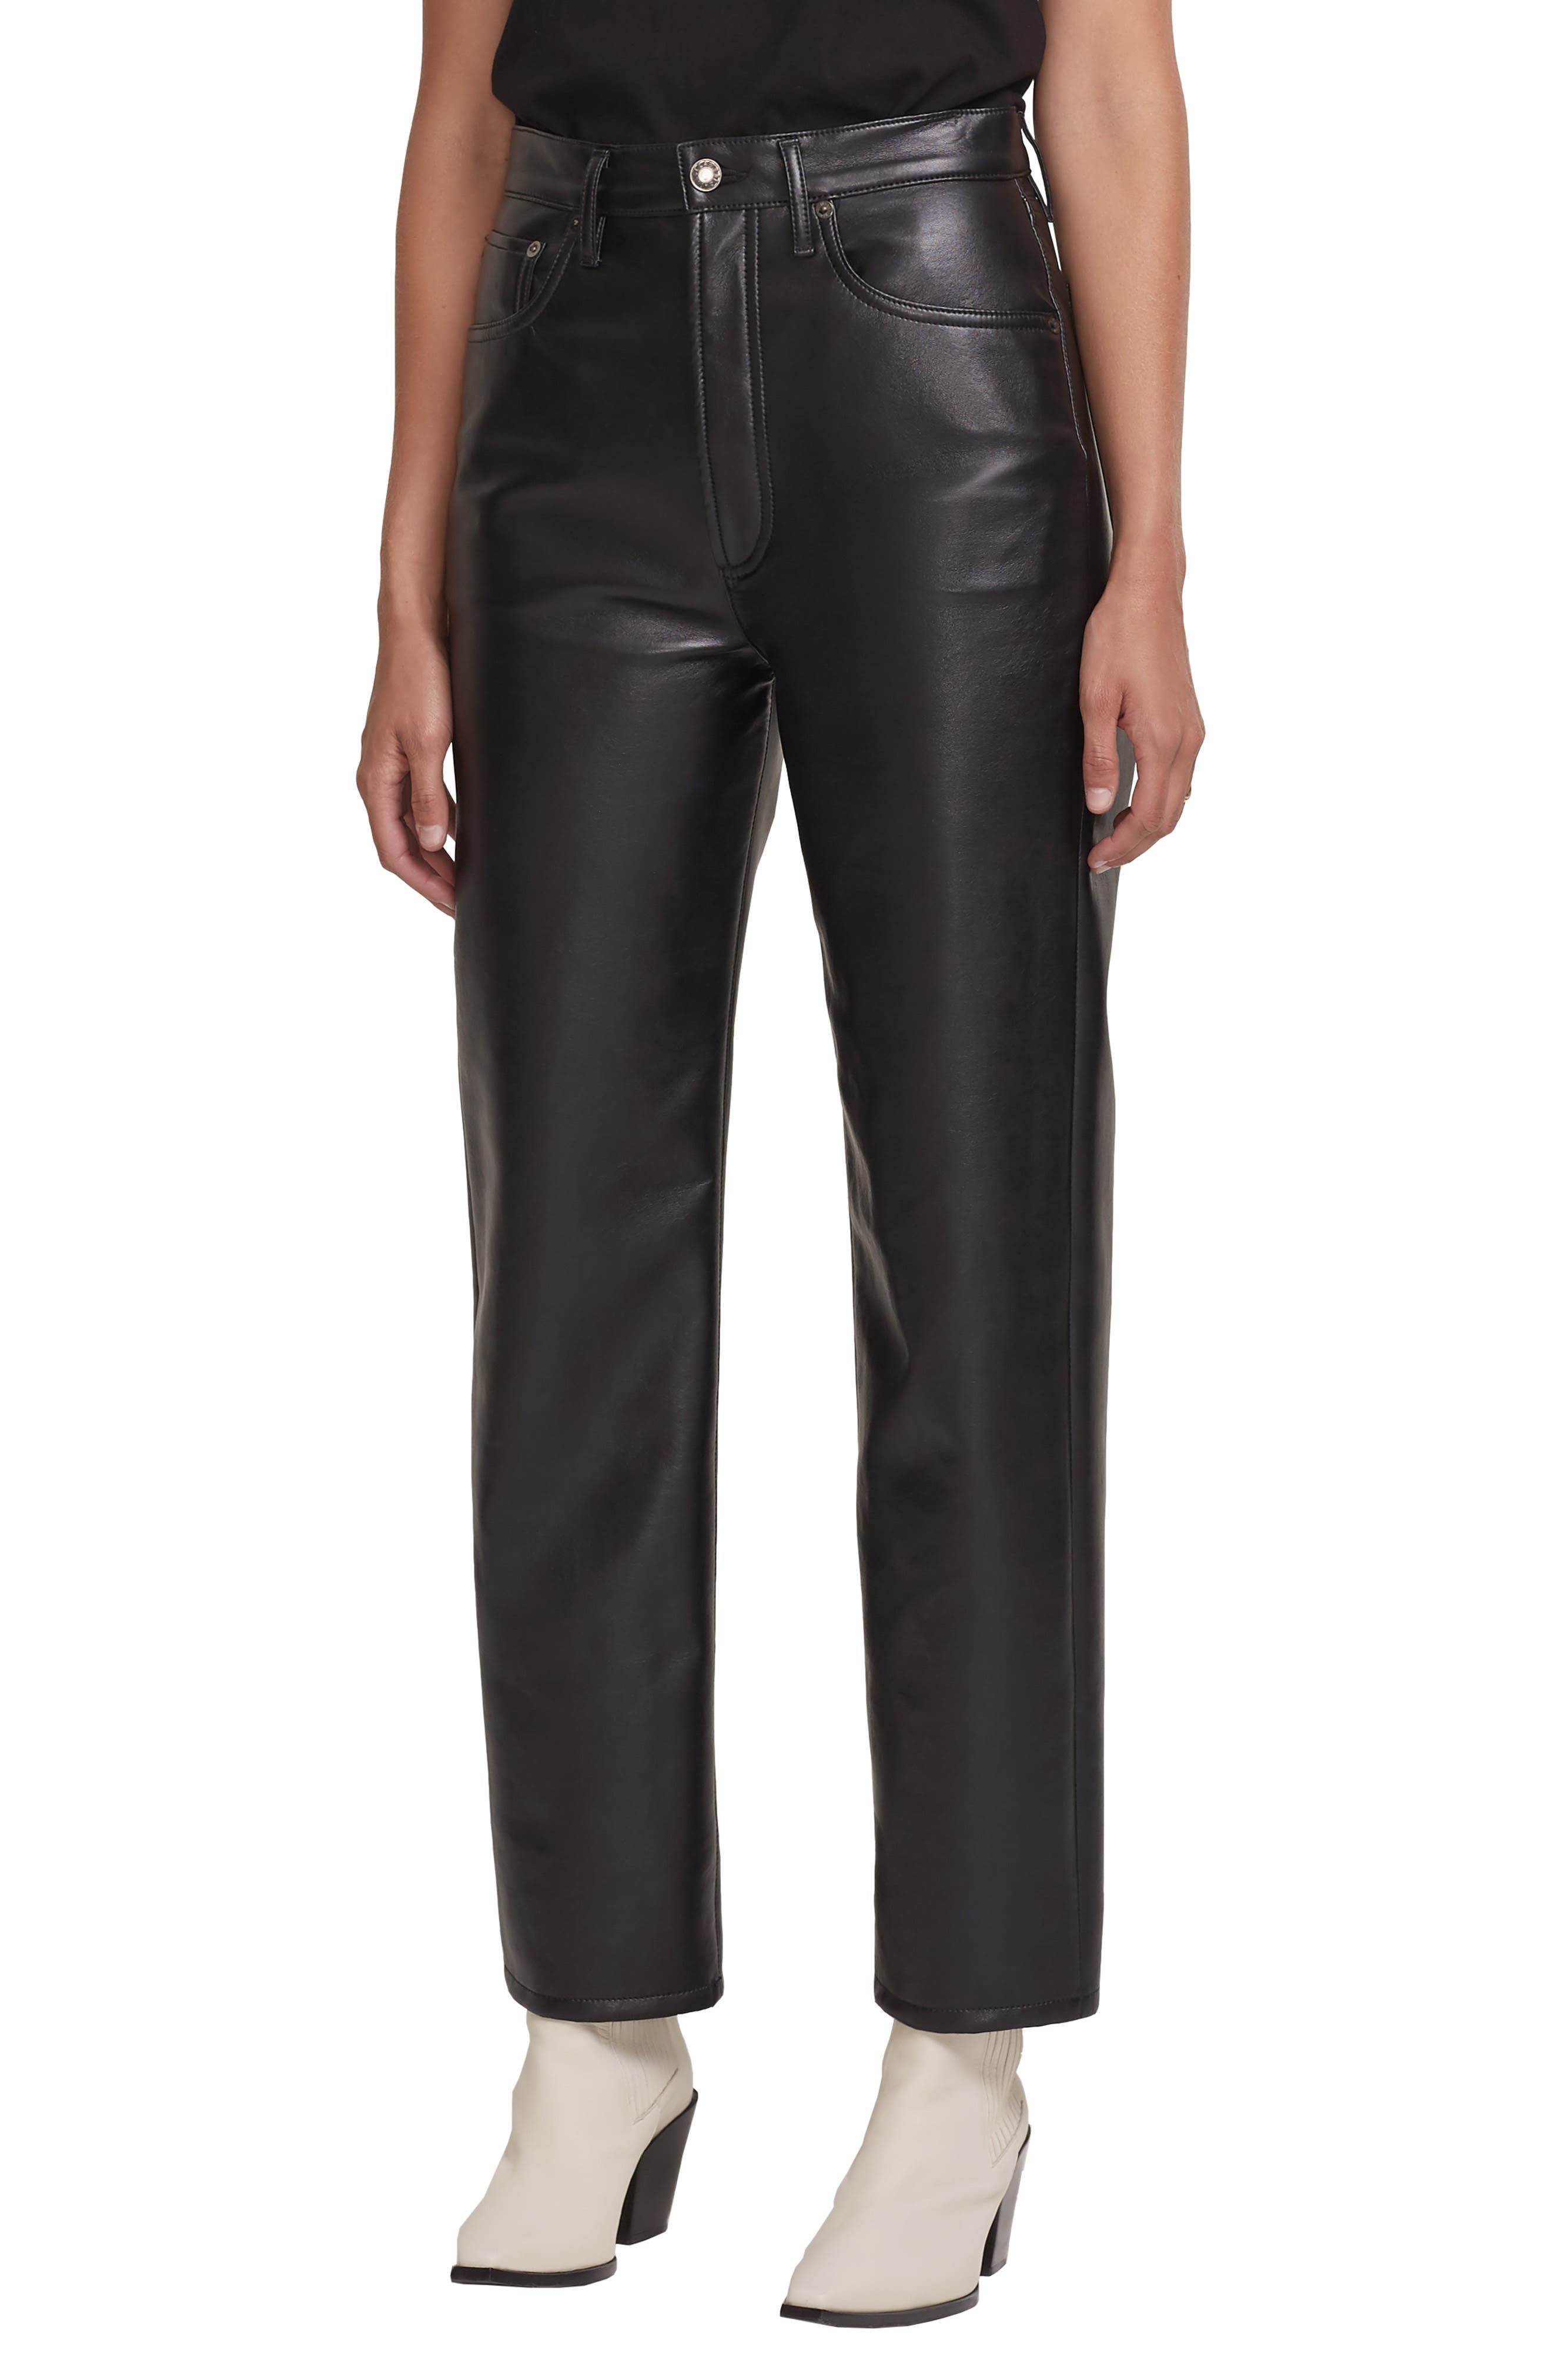 AGOLDE '90s Pinch Waist Recycled Leather High Waist Pants in Detox at Nordstrom